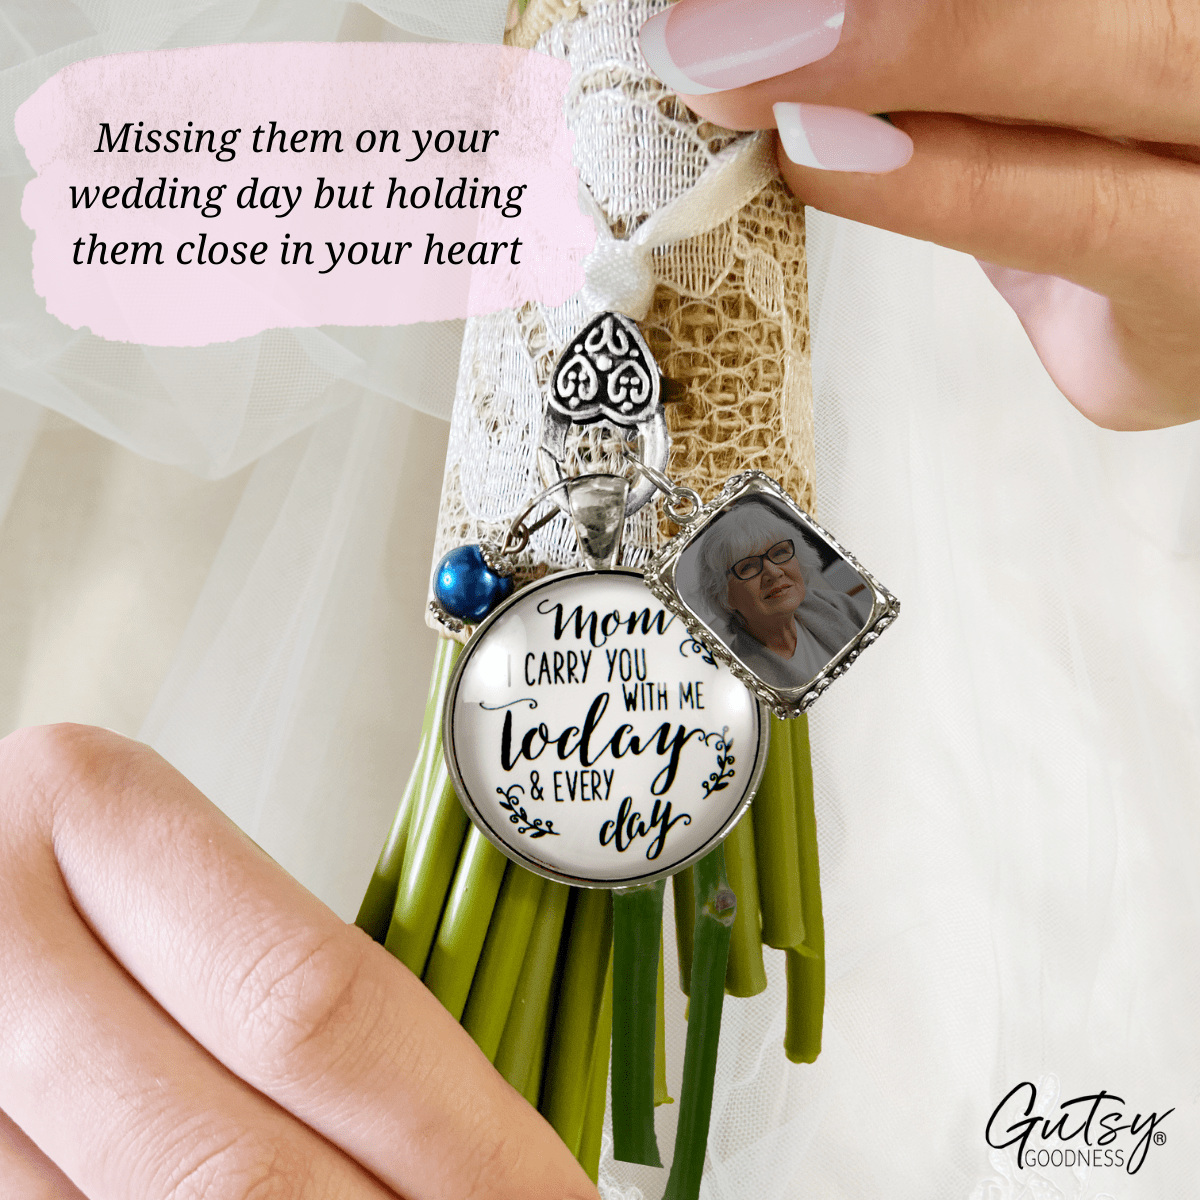 Bridal Bouquet Photo Charm Mom I Carry You Wedding White Silver Blue Bead - Gutsy Goodness;Bridal Bouquet Photo Charm Mom I Carry You Wedding White Silver Blue Bead - Gutsy Goodness Handmade Jewelry Gifts